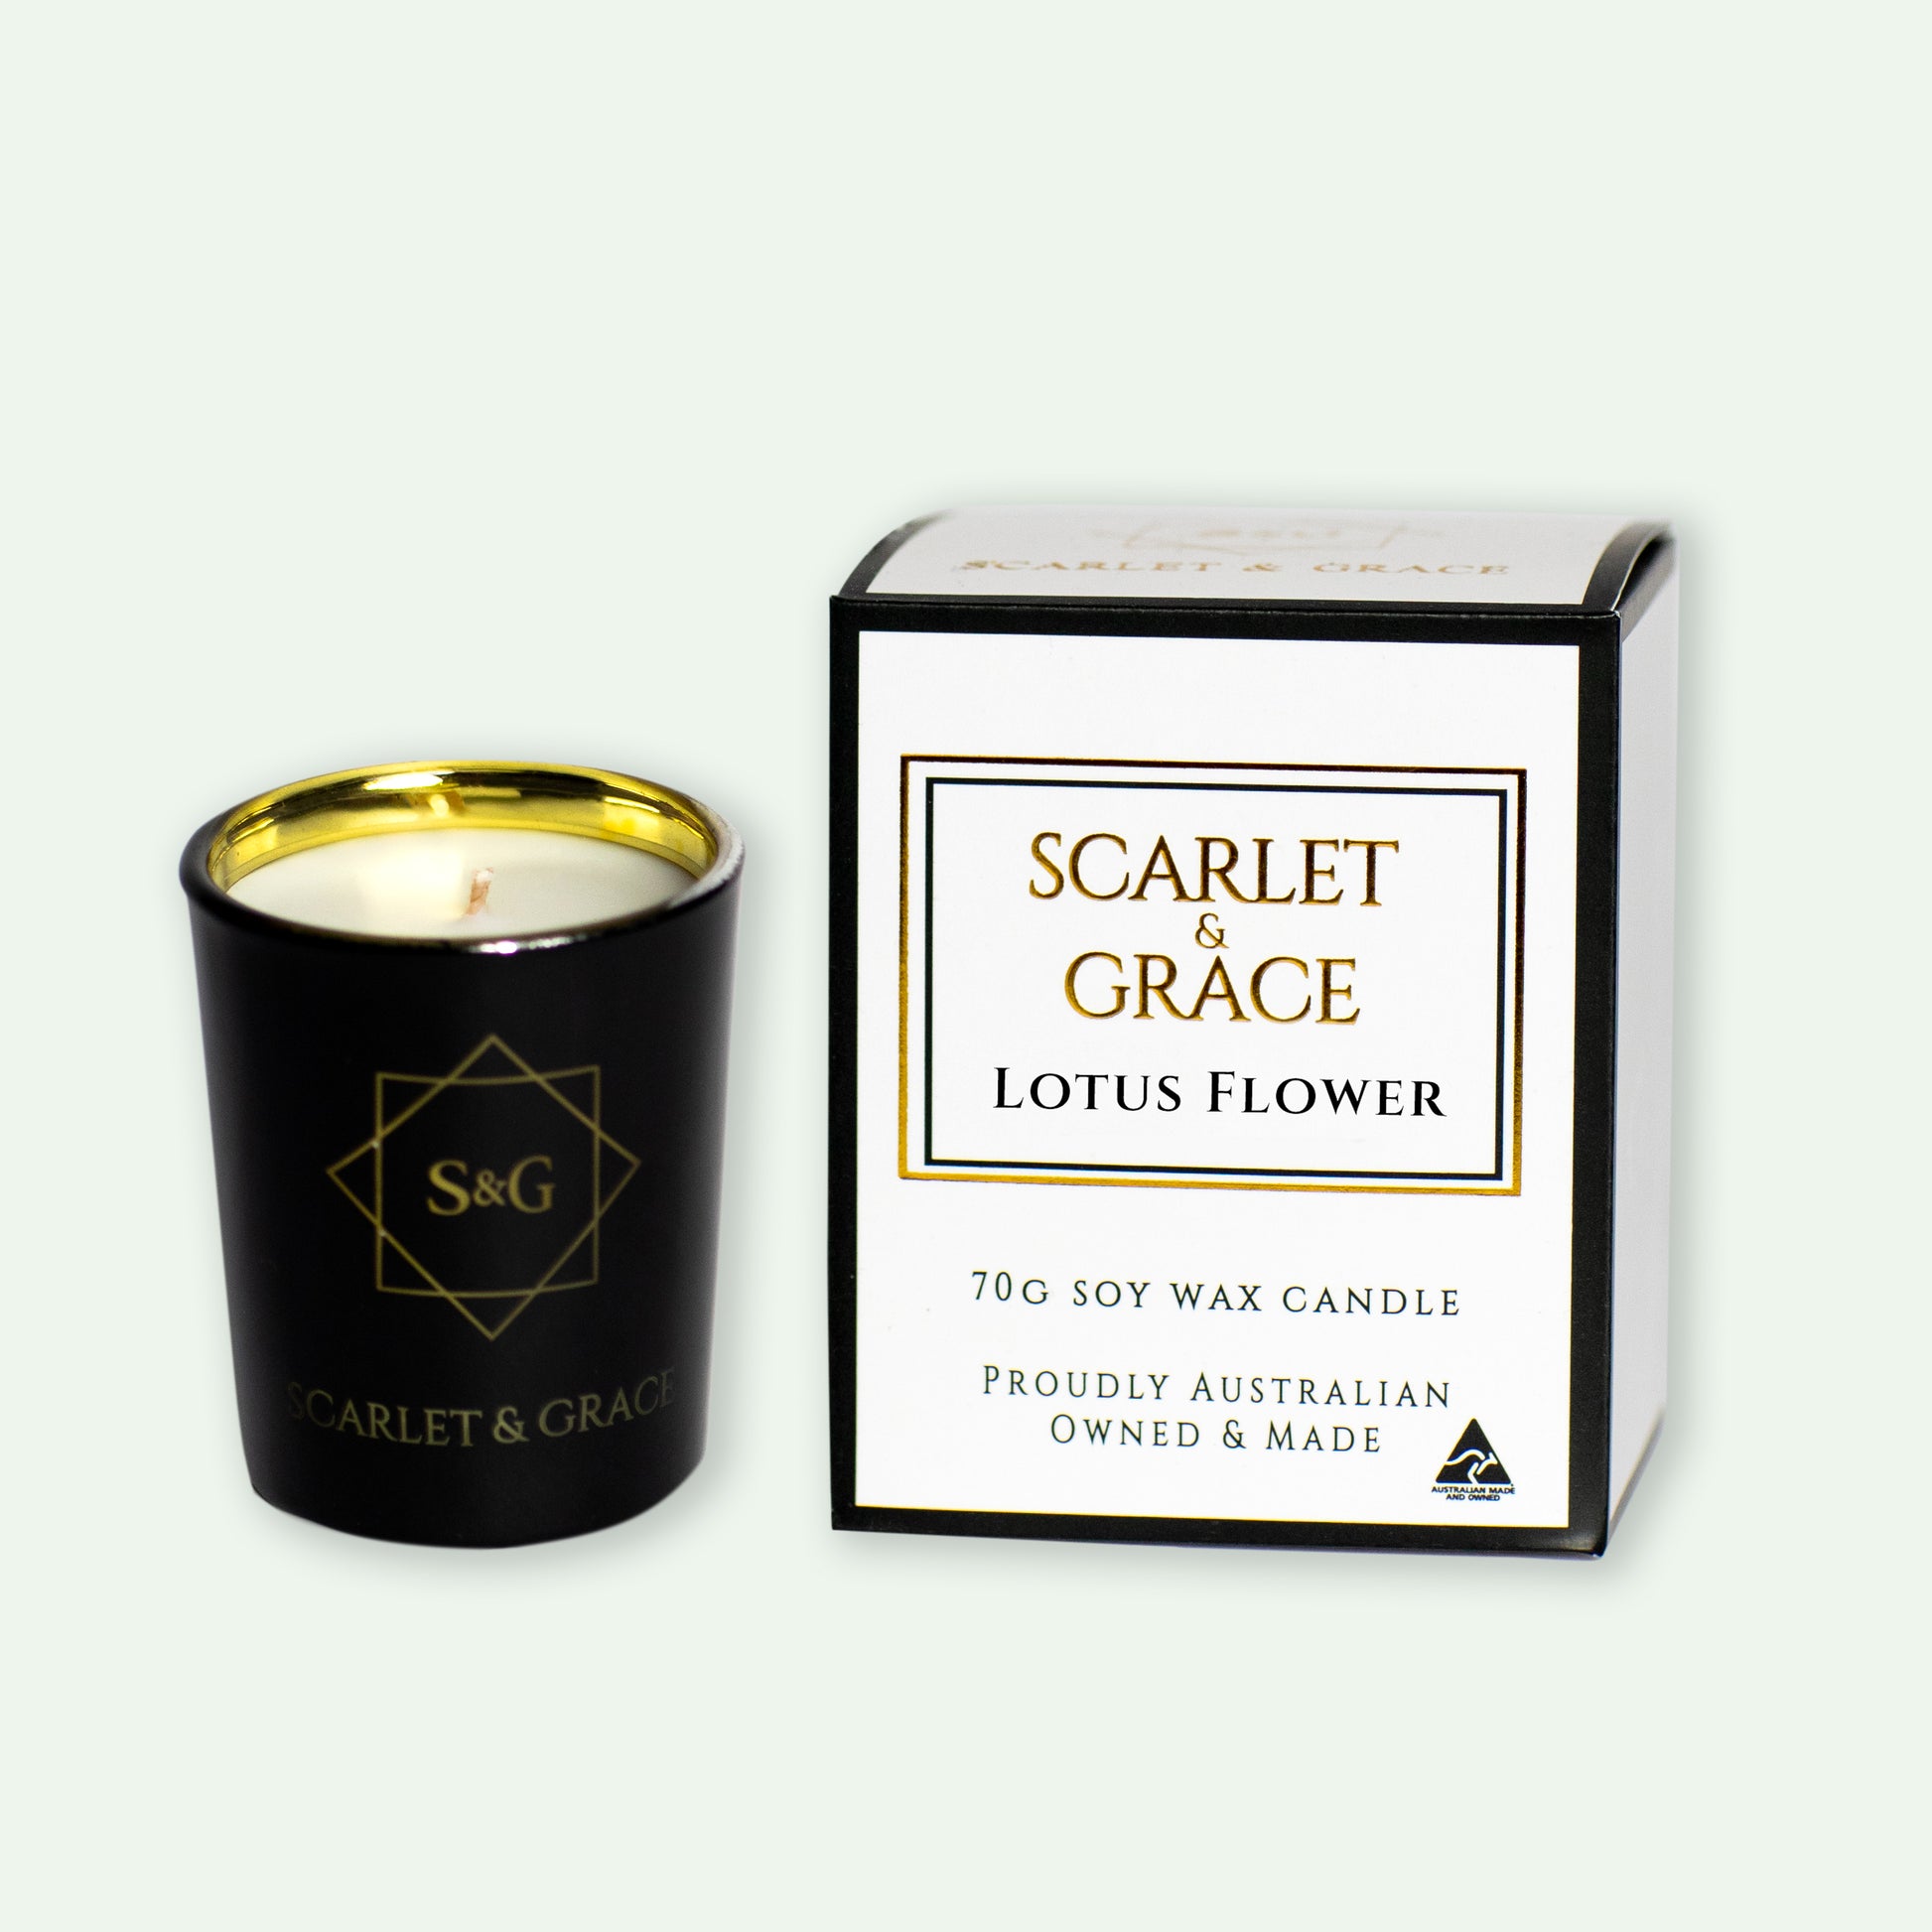 Lotus Flower - 70gm Soy Wax Candle - Scarlet & Grace